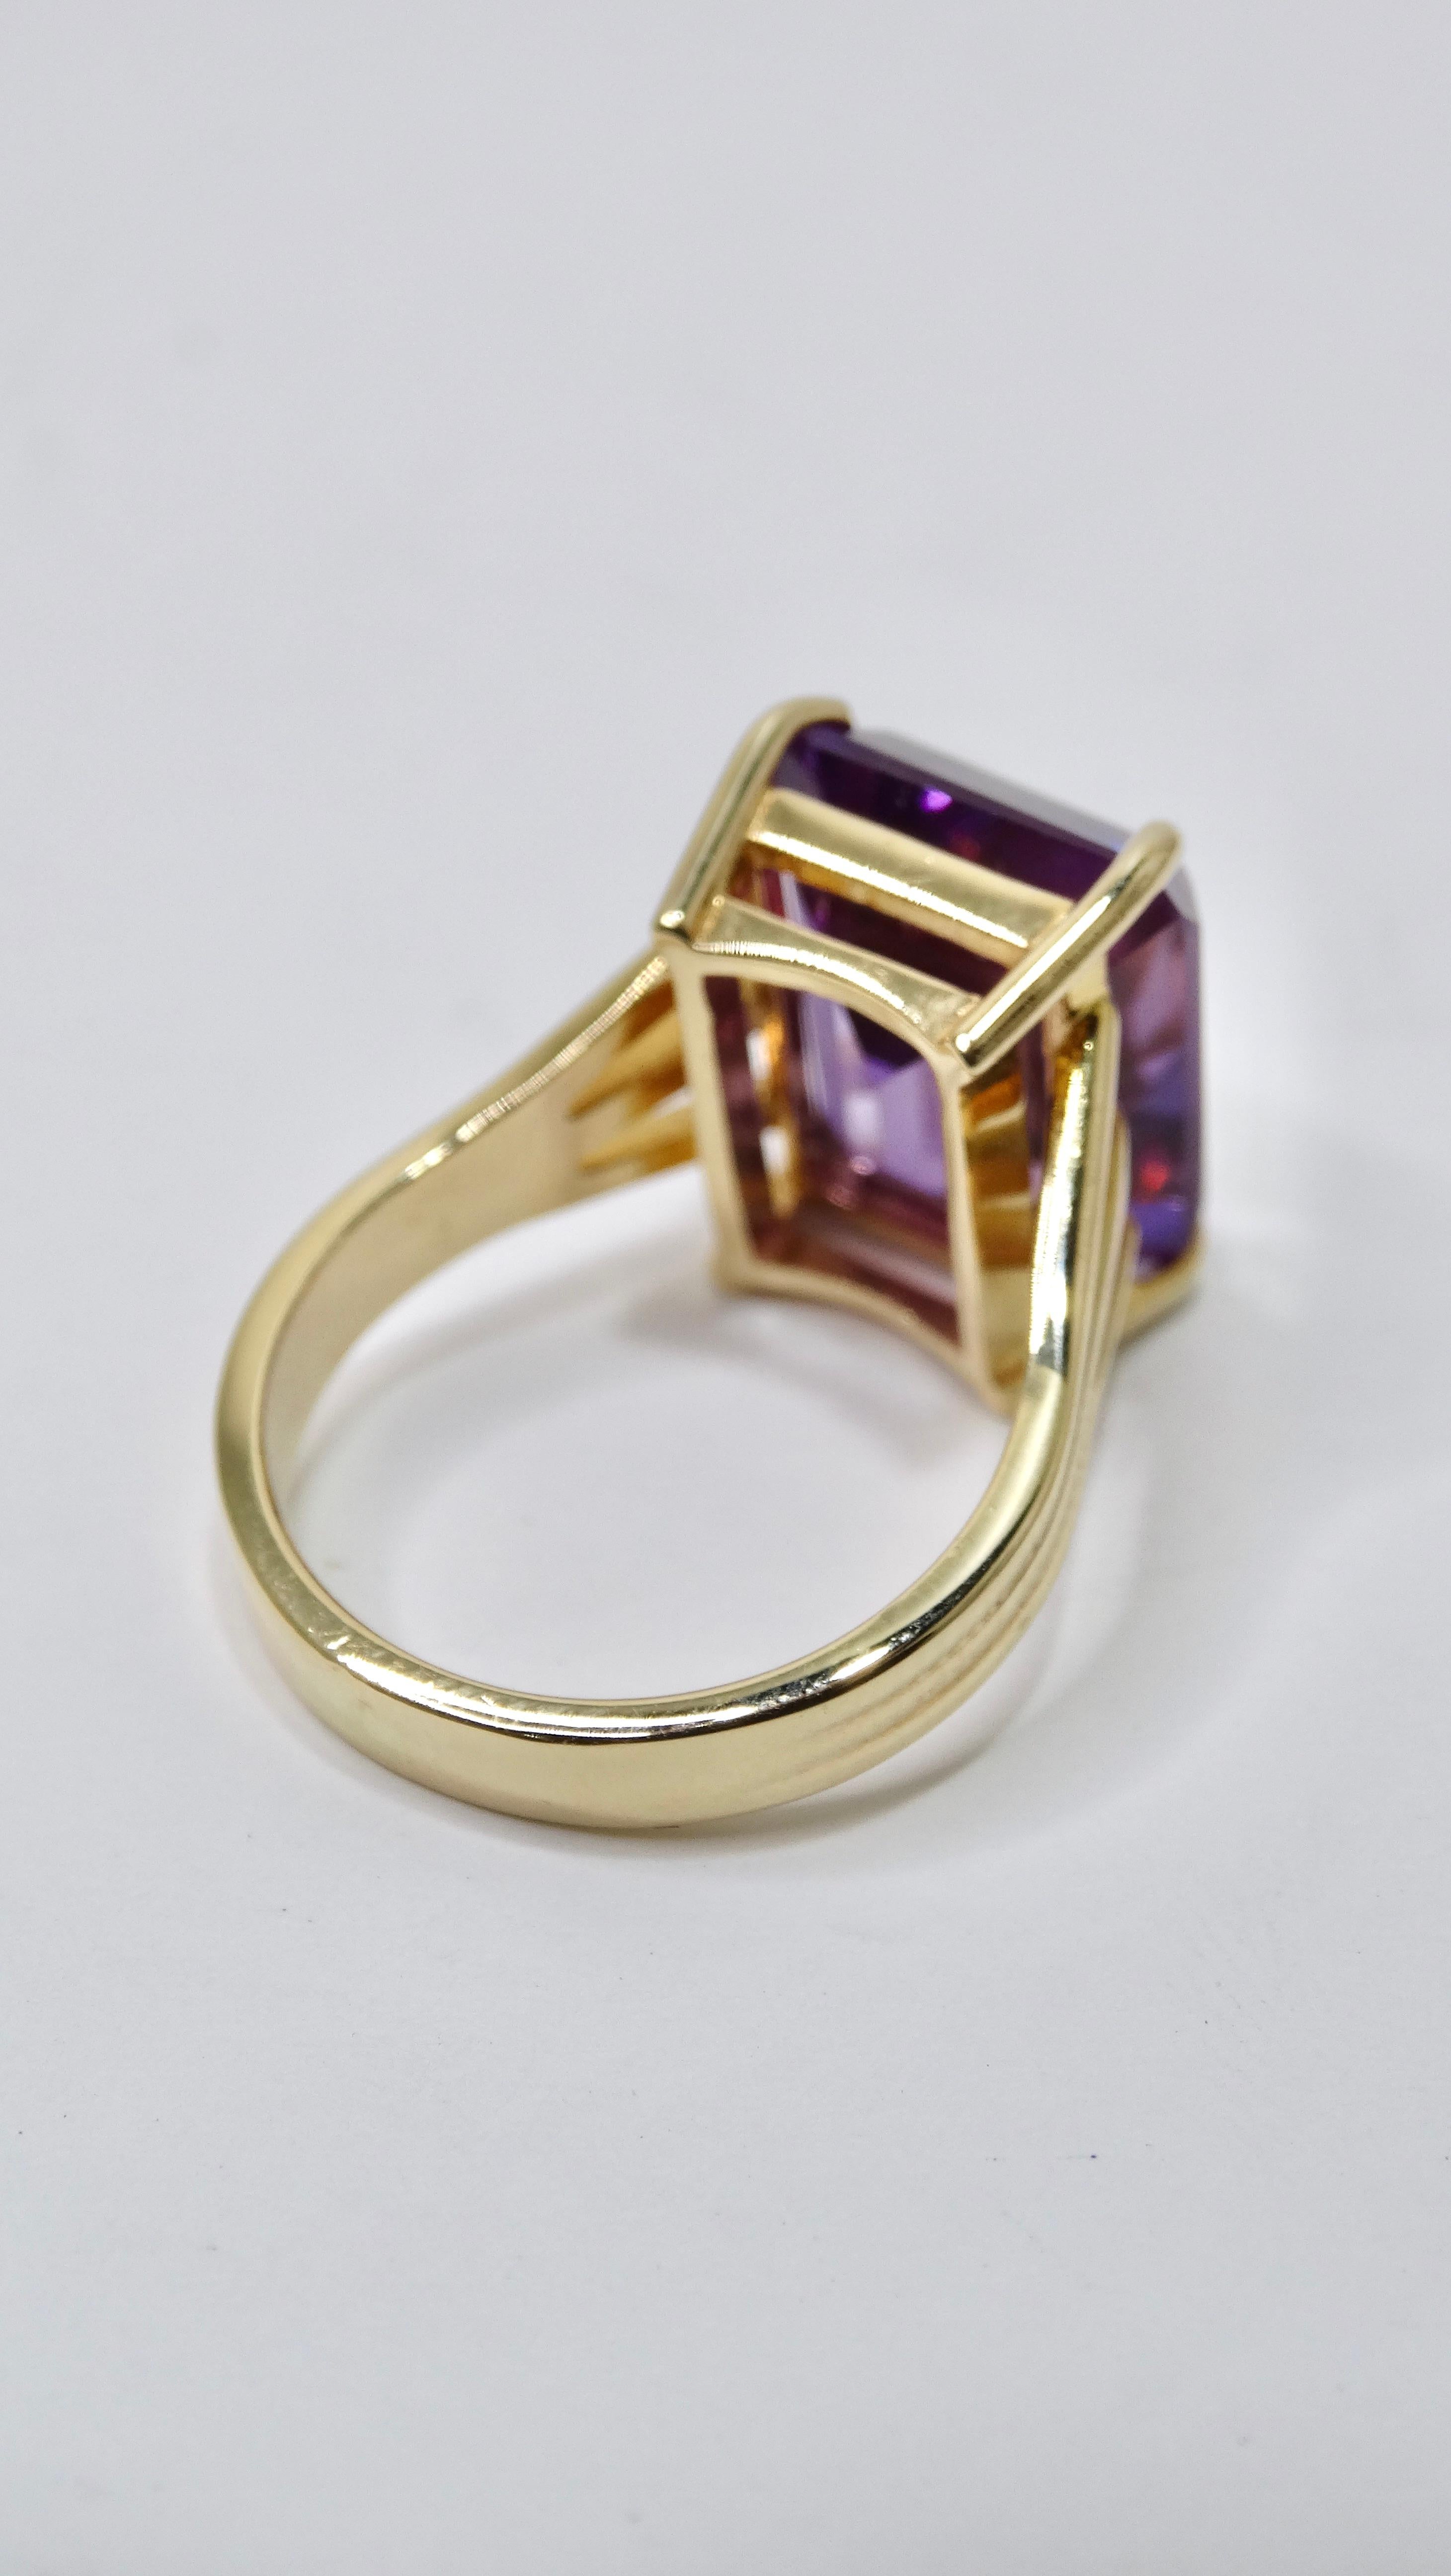 Amethyst Emerald Cut 14k Gold Solitaire Ring In Excellent Condition For Sale In Scottsdale, AZ